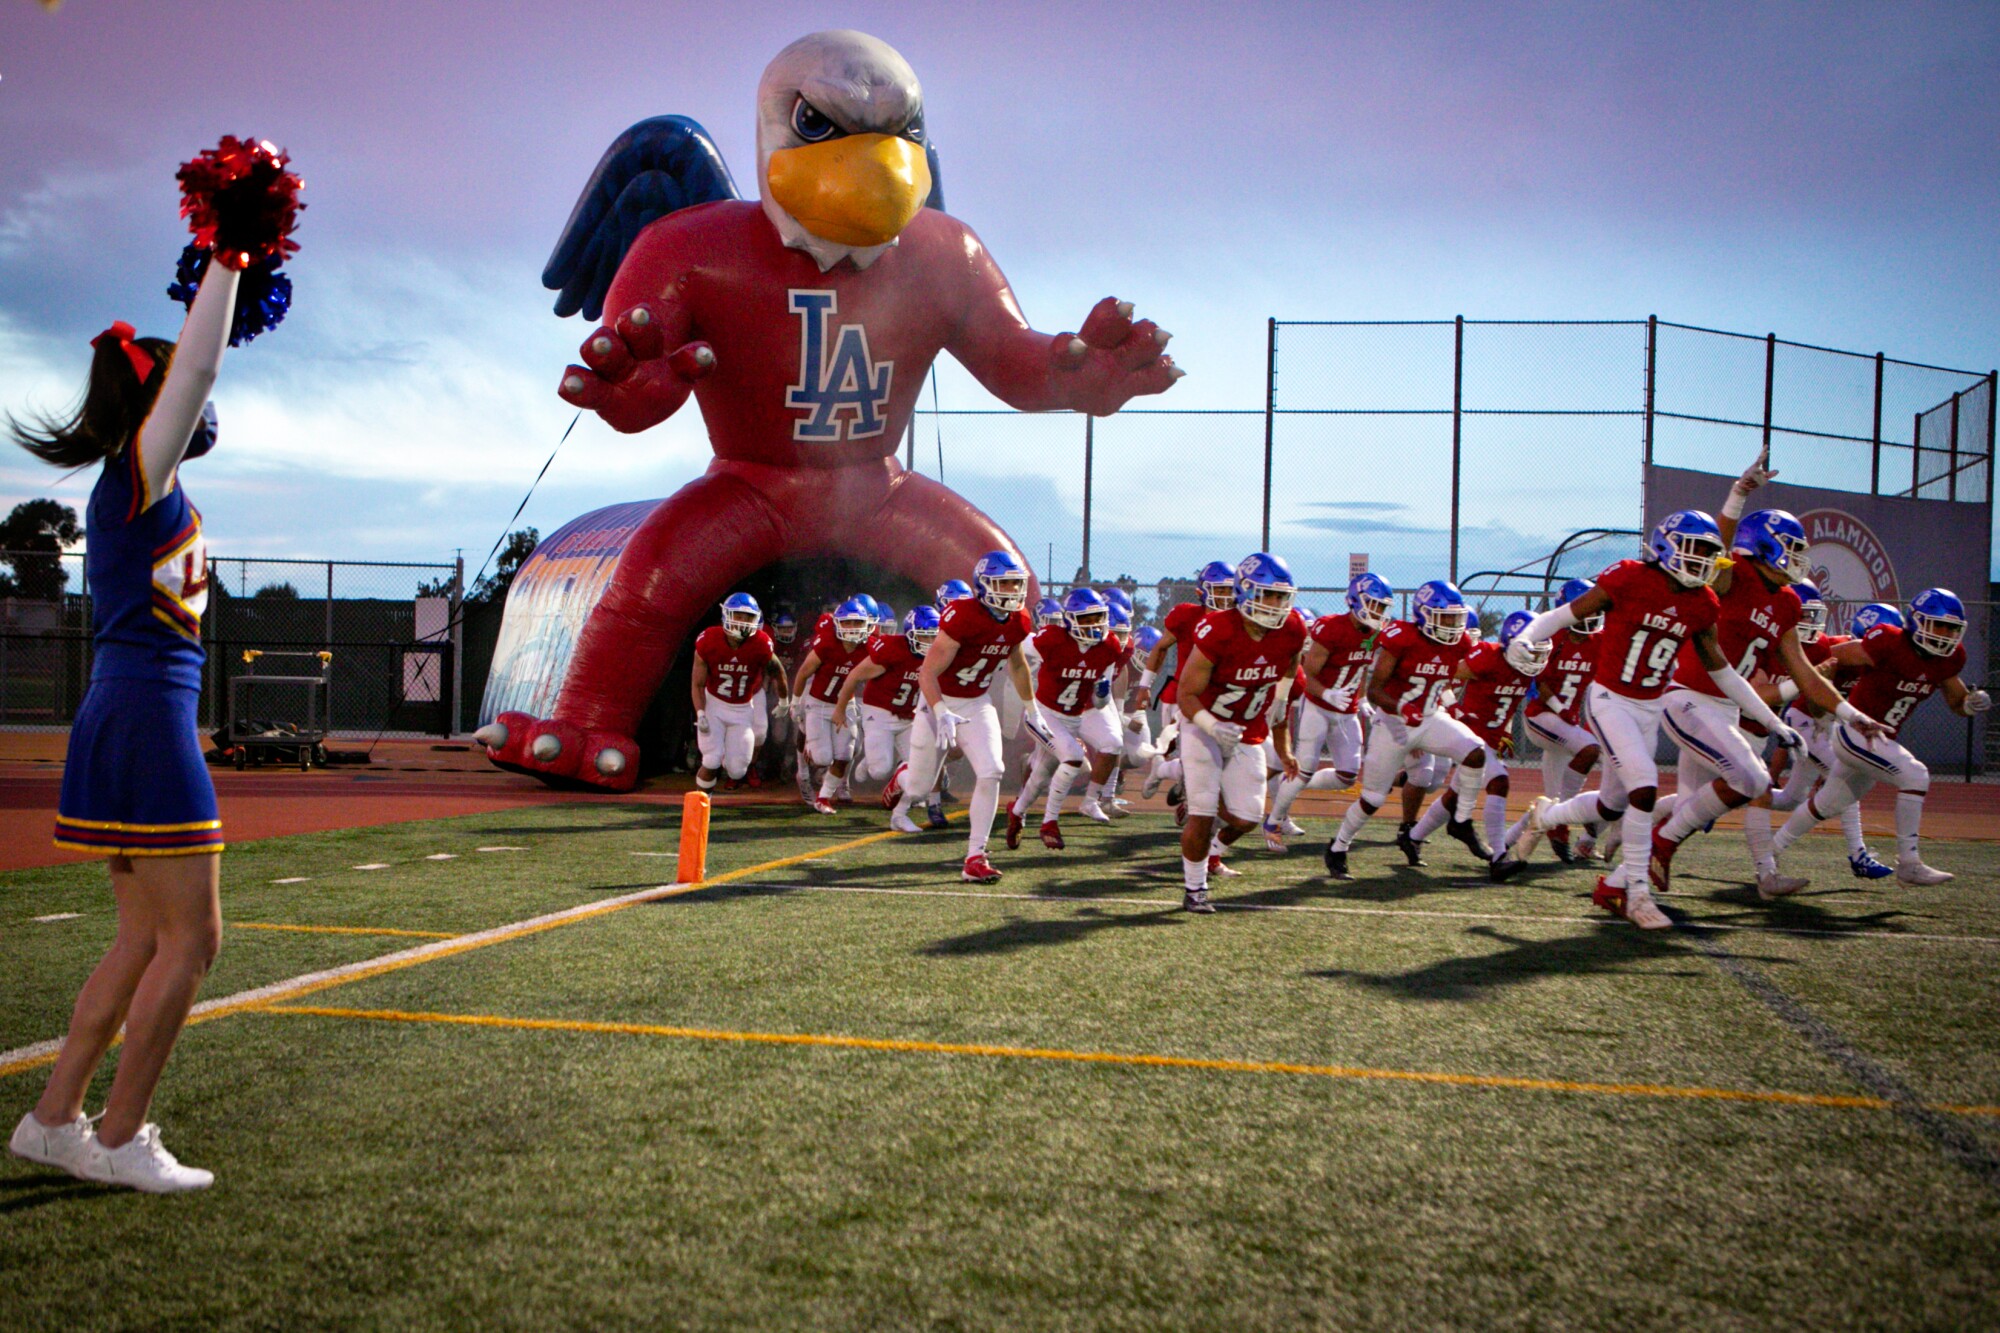 The Los Alamitos football team enters the field through an inflatable tunnel with a cheerleader cheering nearby.